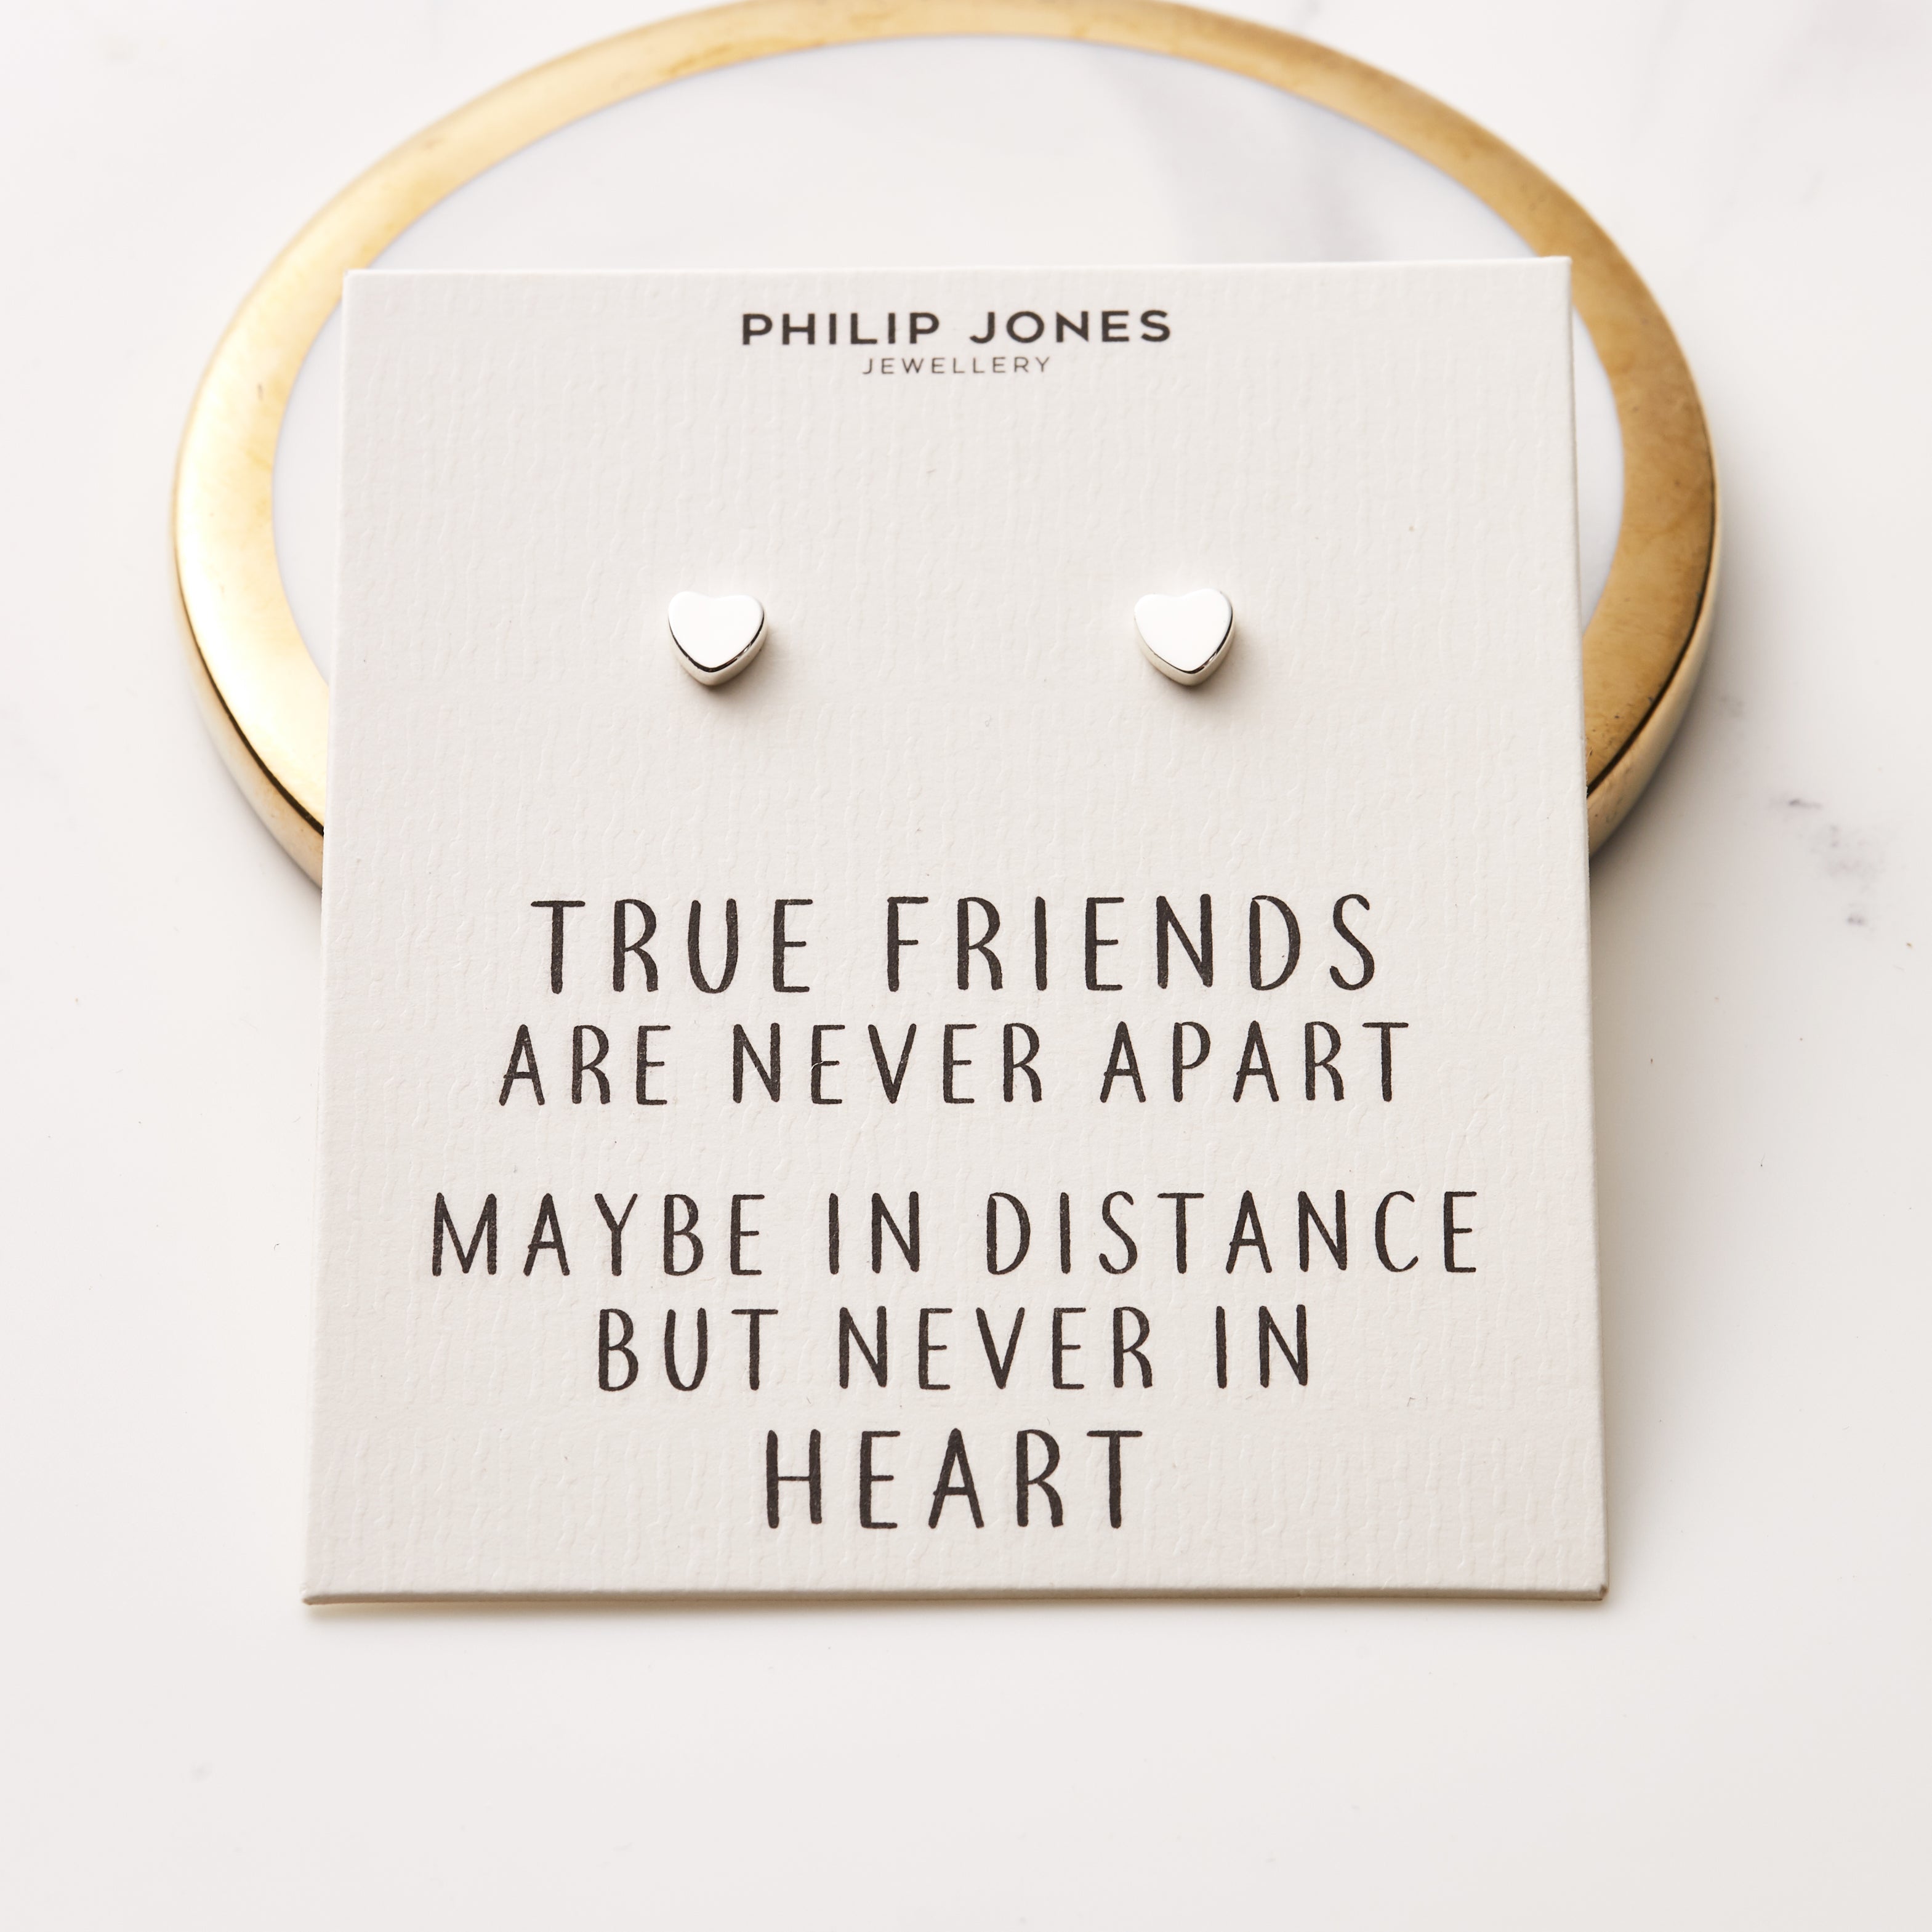 Silver Plated Heart Stud Earrings with Quote Card